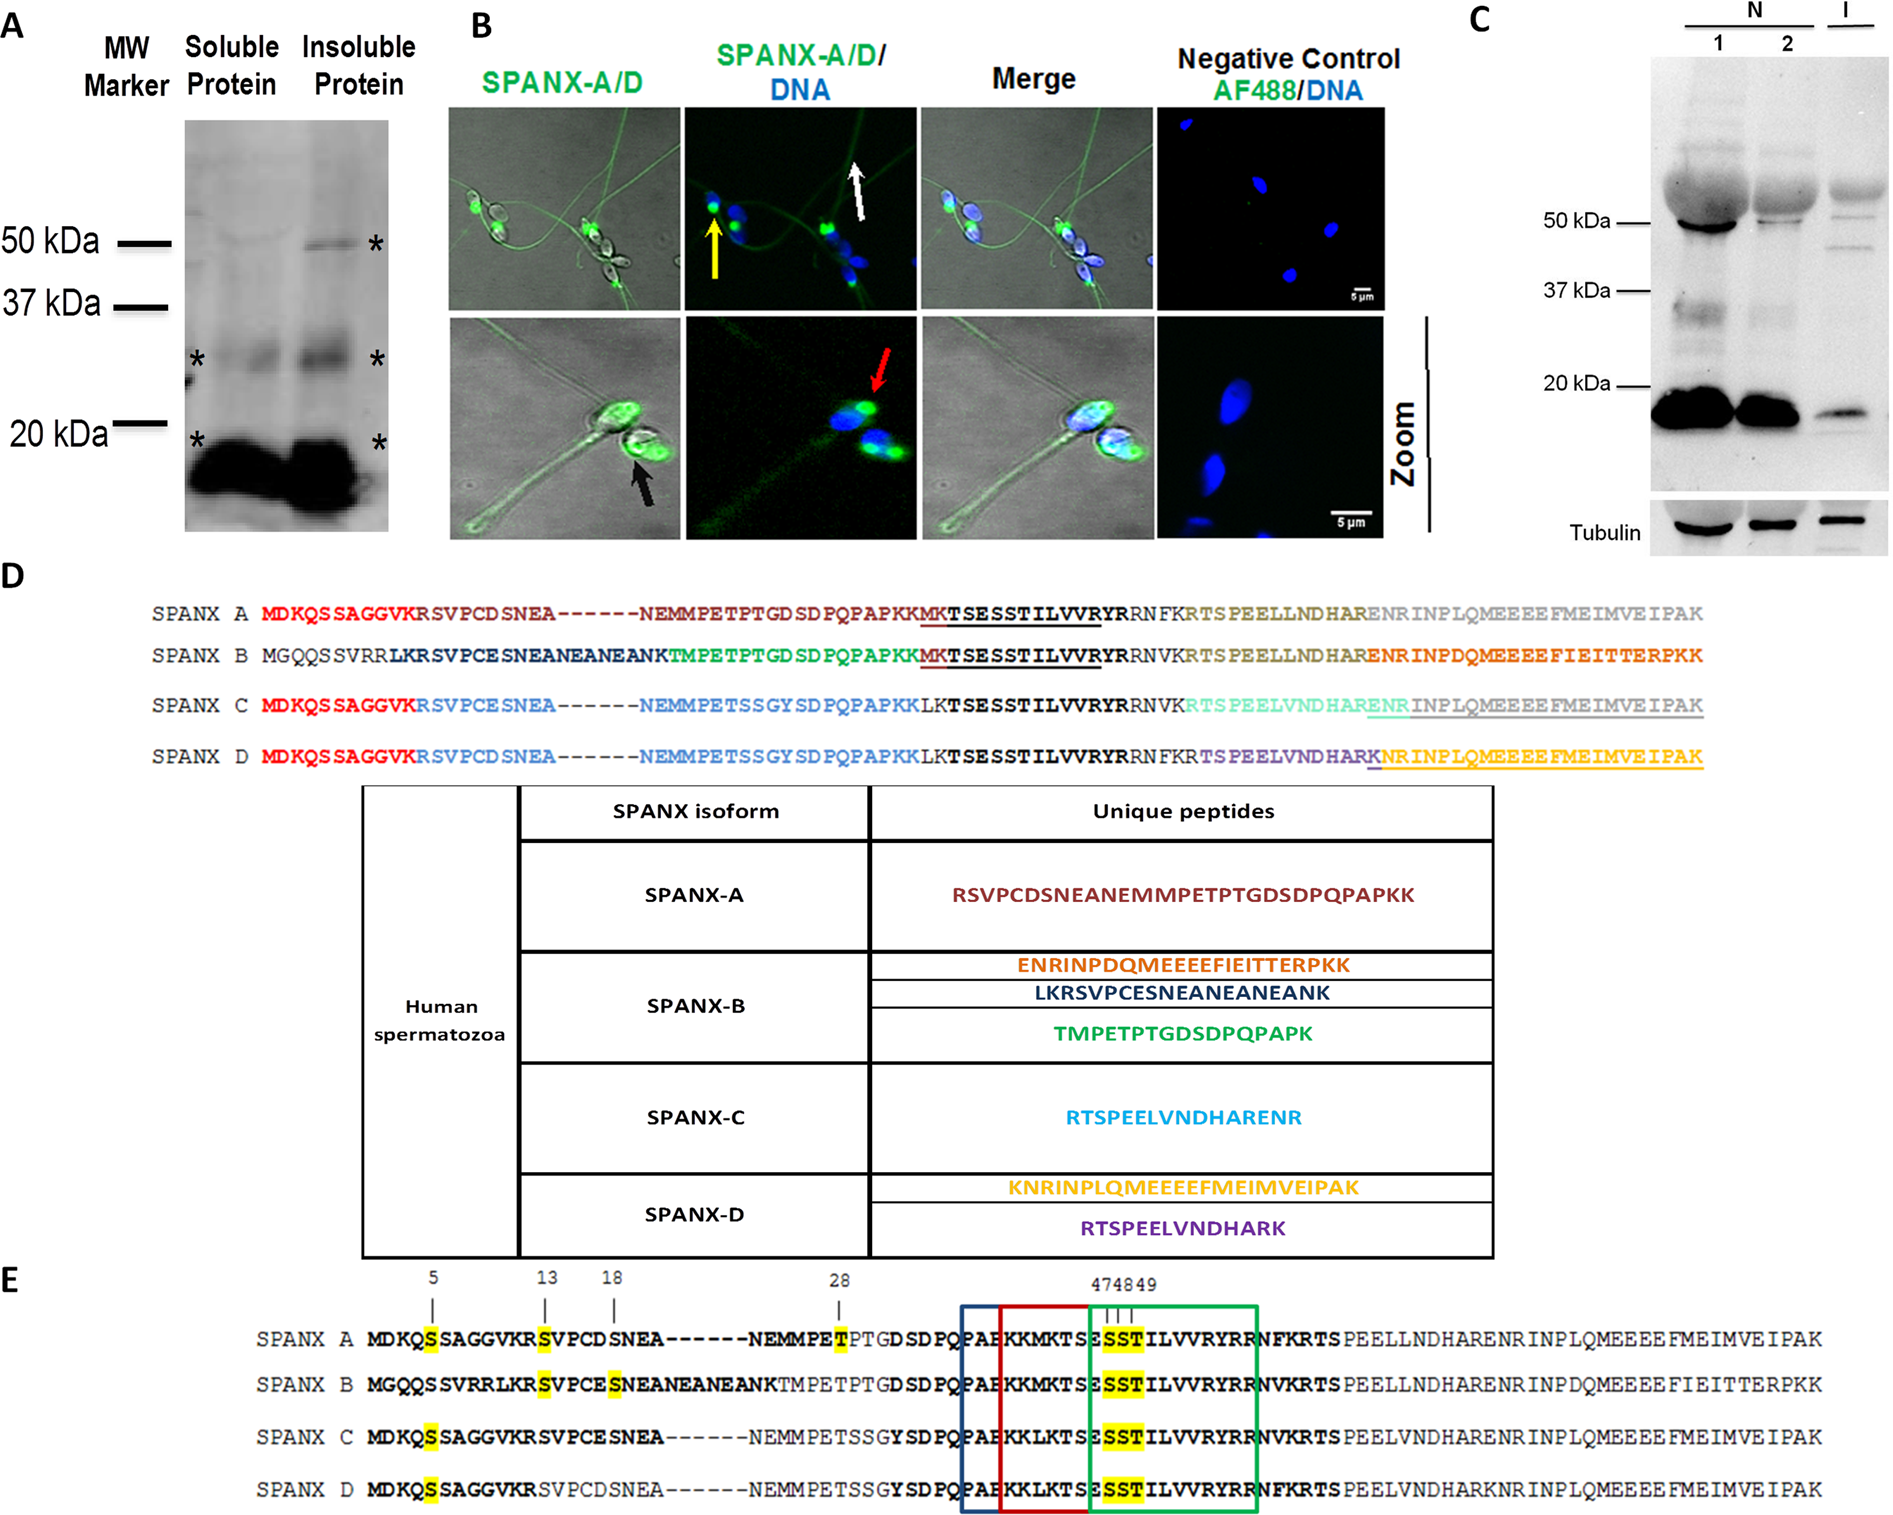 SPANX-A/D protein subfamily plays a key role in nuclear organisation,  metabolism and flagellar motility of human spermatozoa